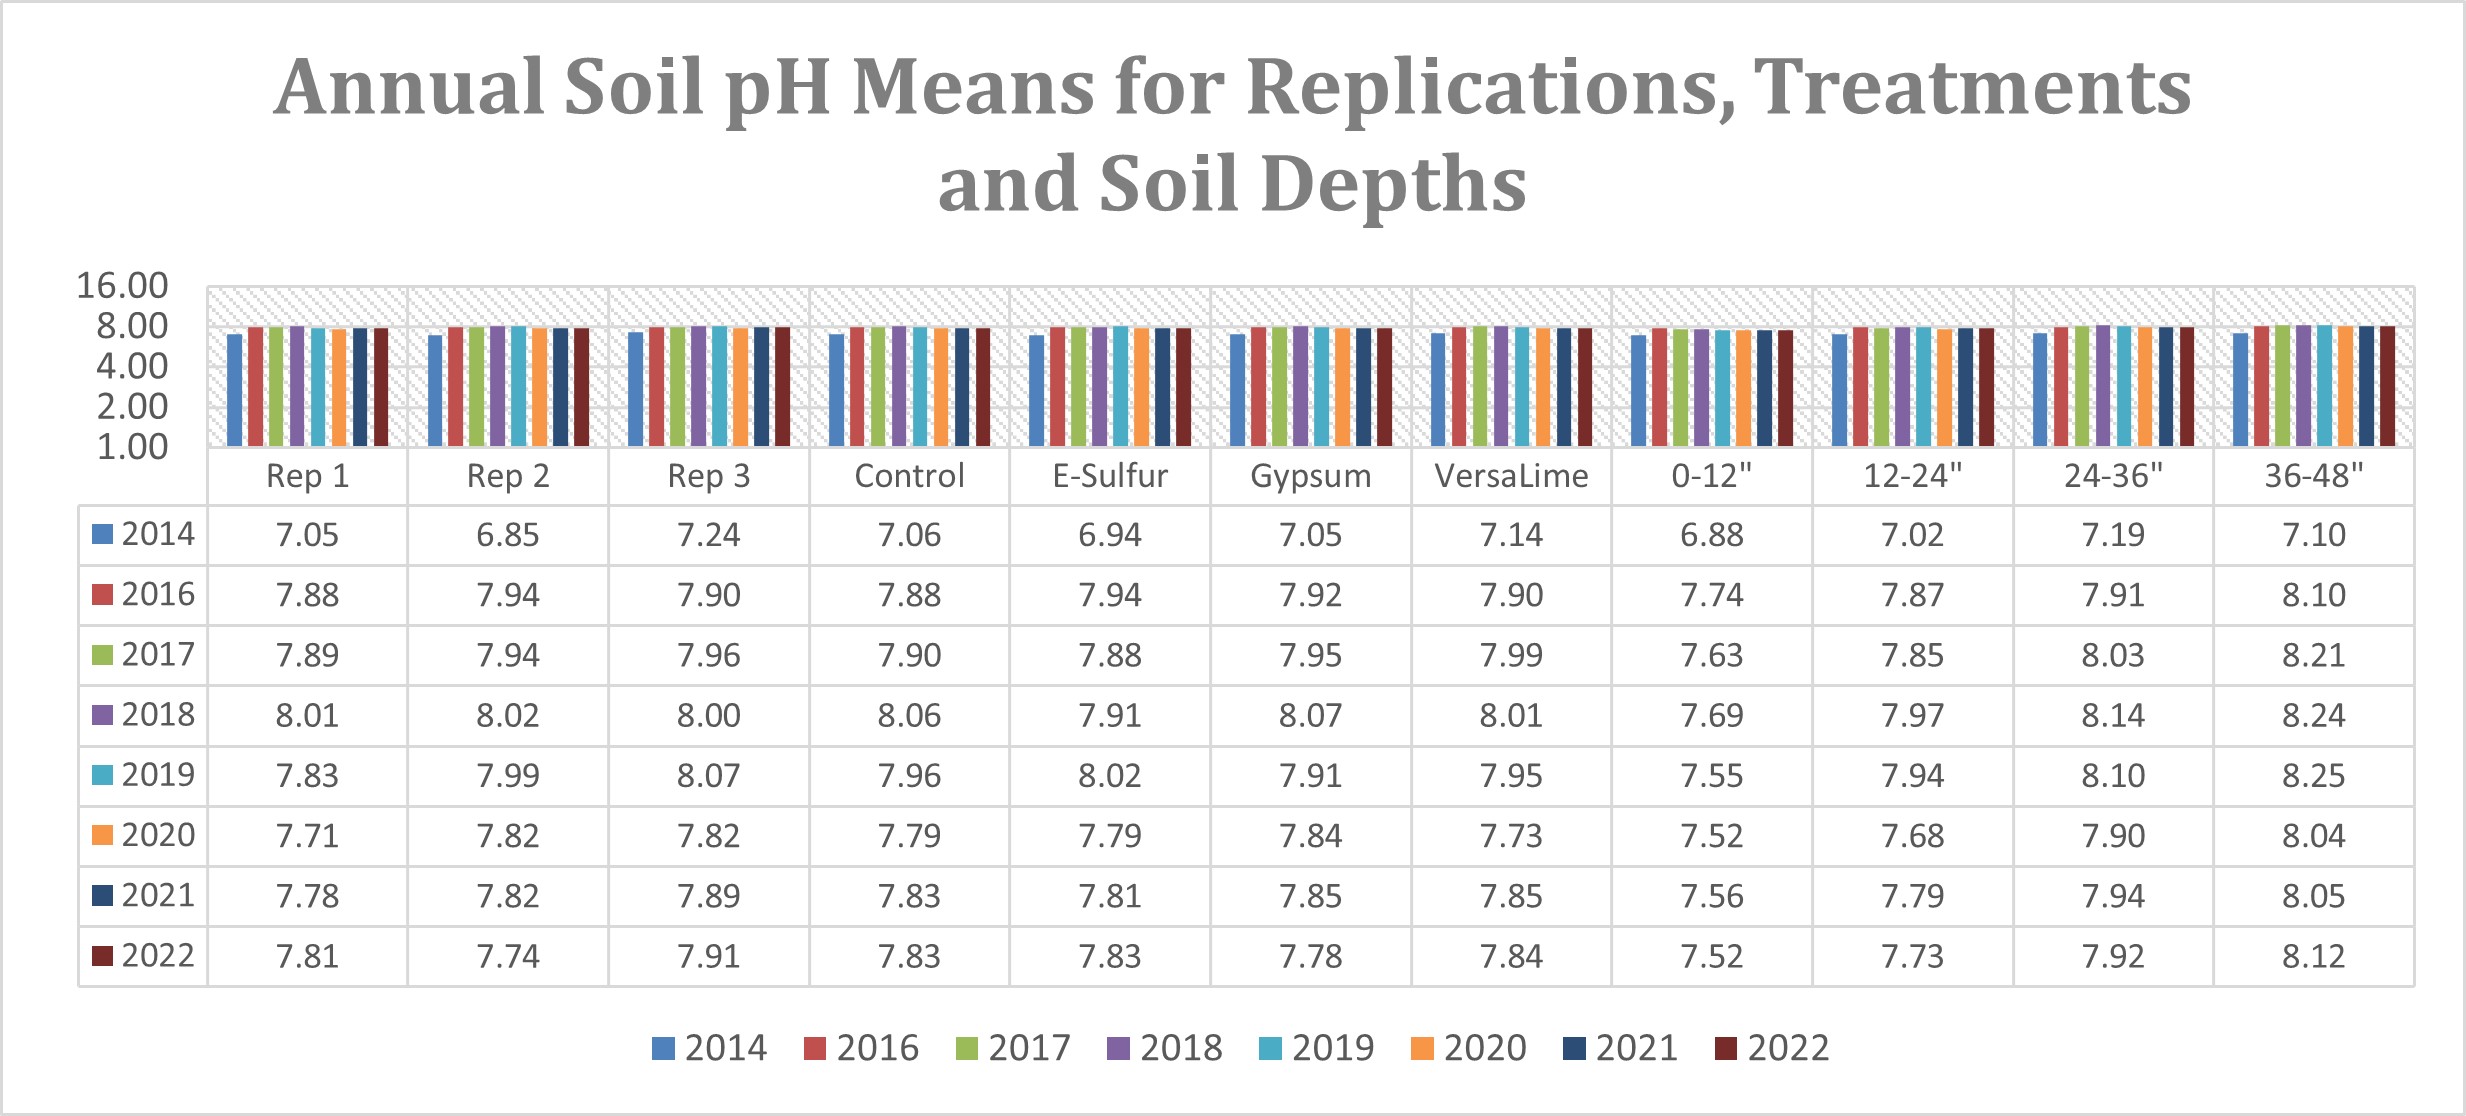 Annual Soil pH Means for Replications, Treatments and Soil Depths 2014, 2016-2022